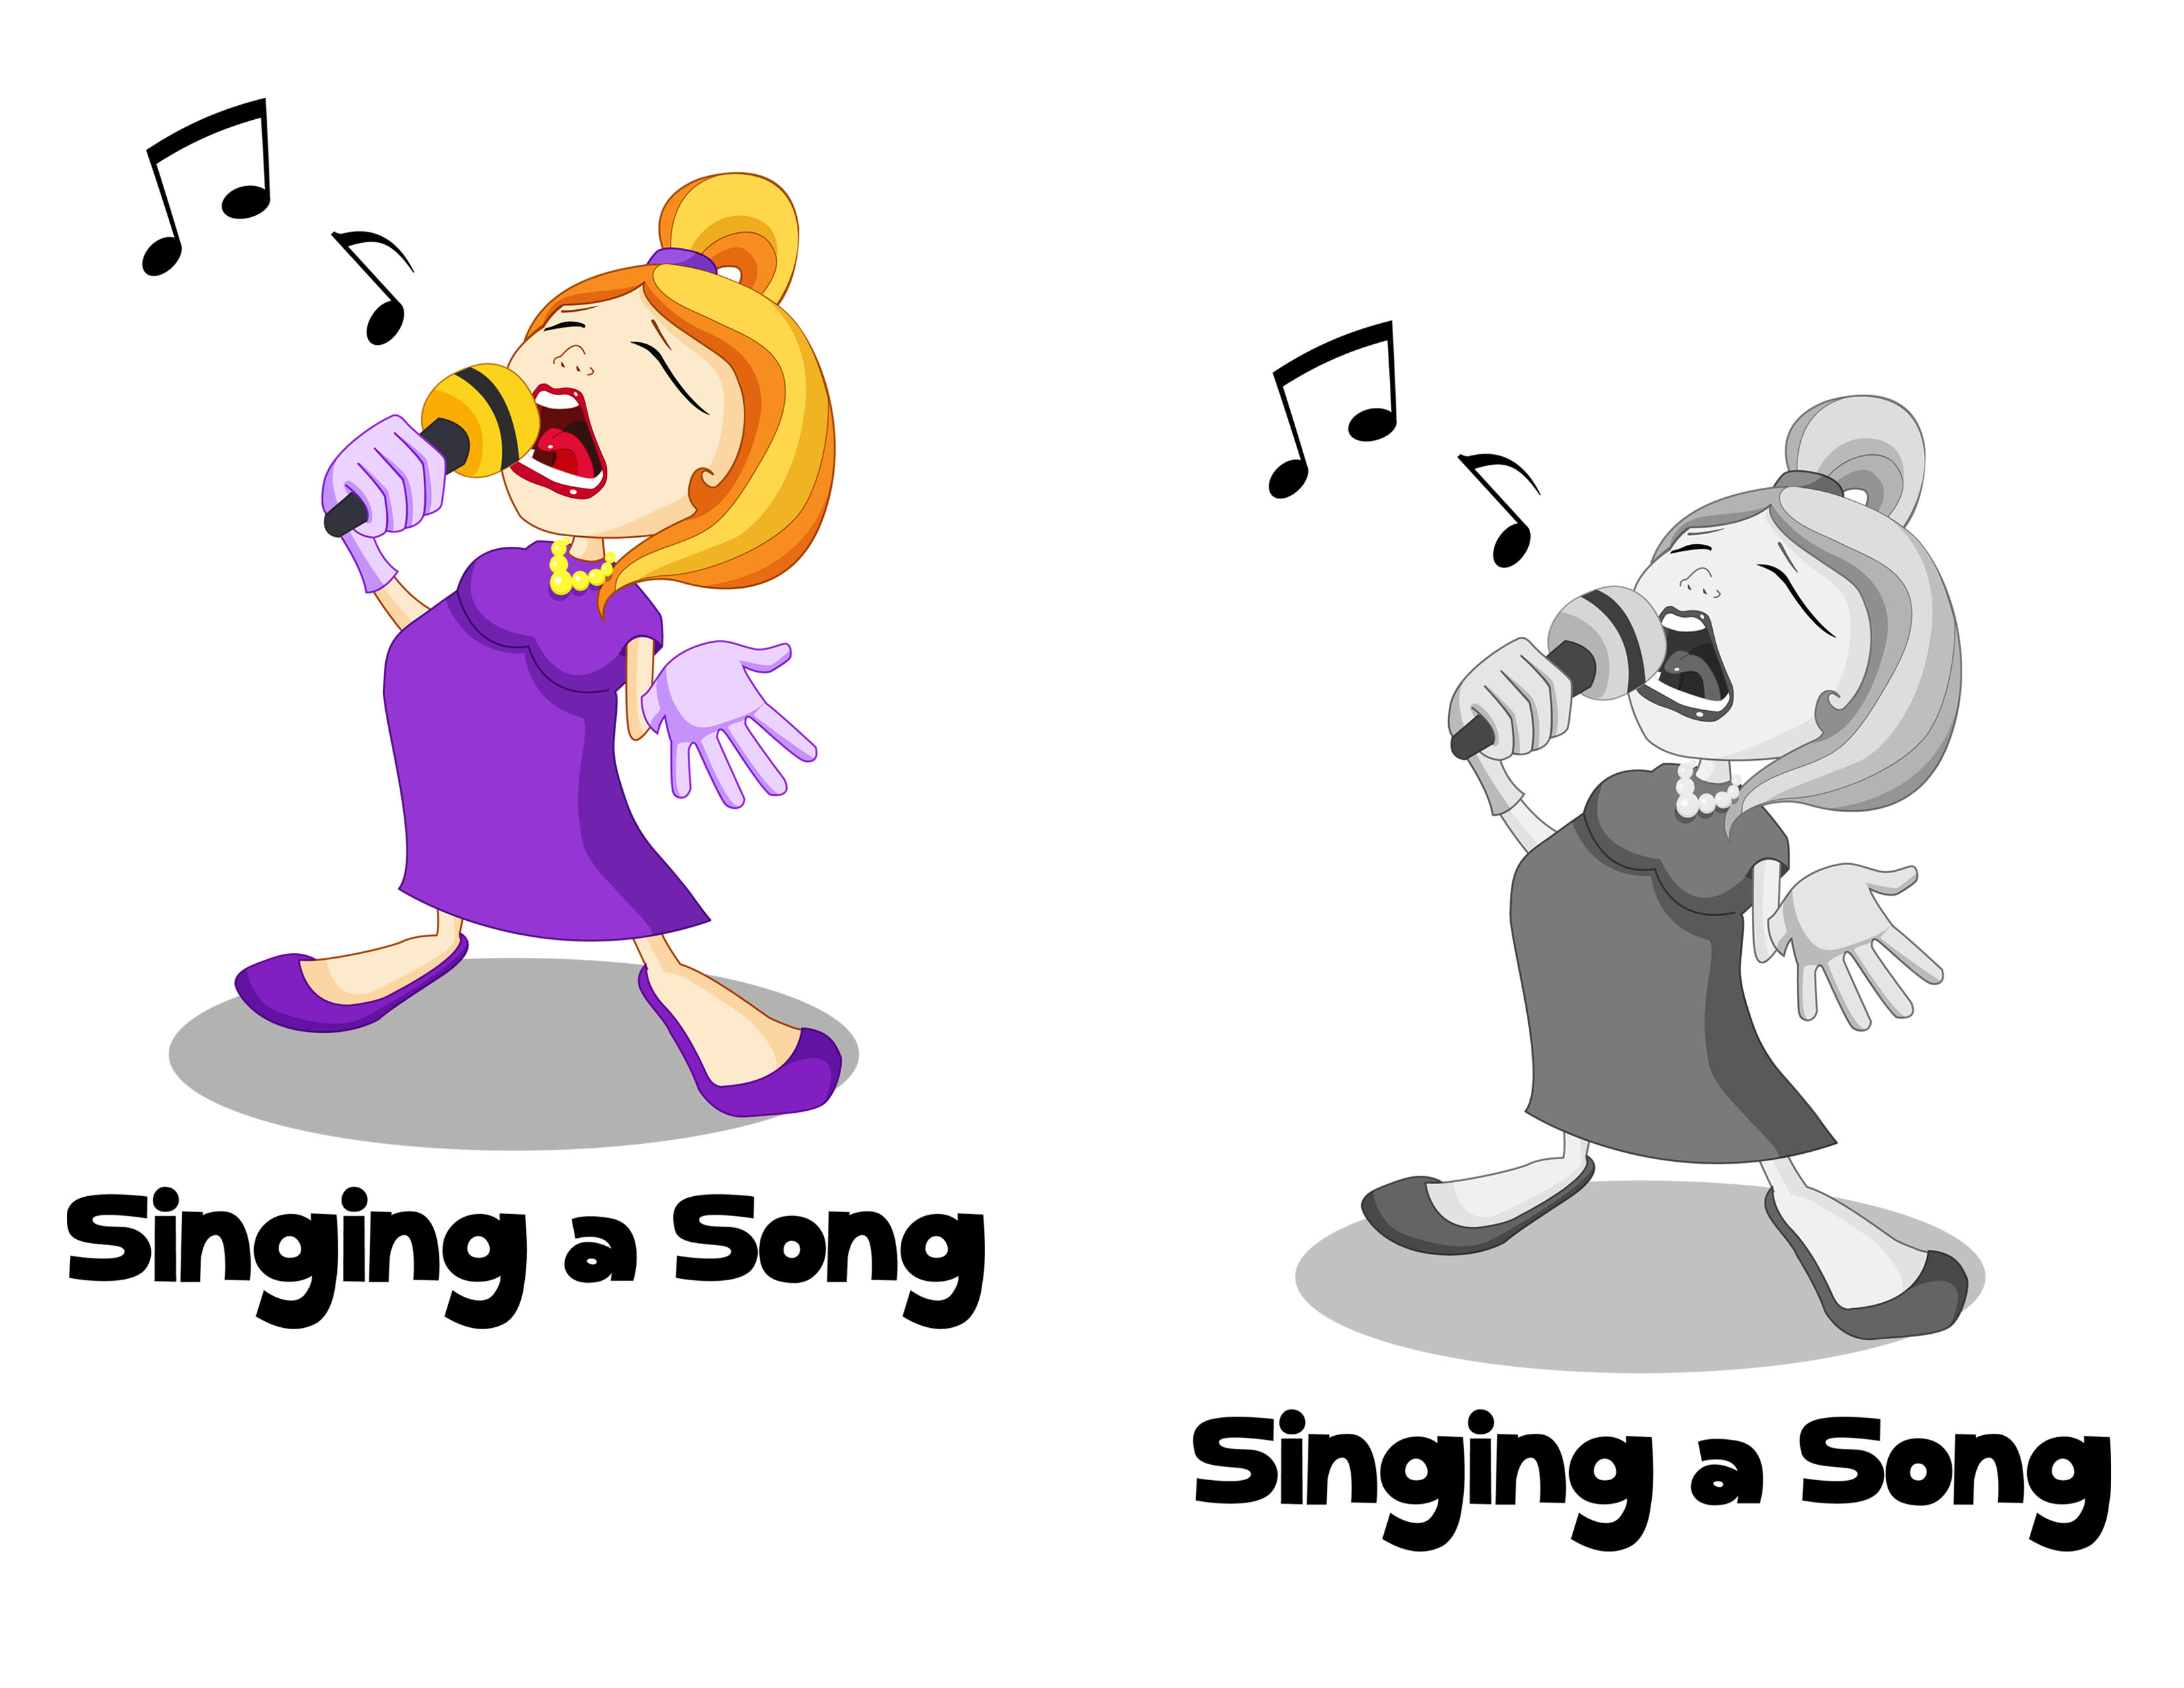 Singing a song перевод. Singing a Song. Sing картинка. Sing a Song. Sing рисунок.